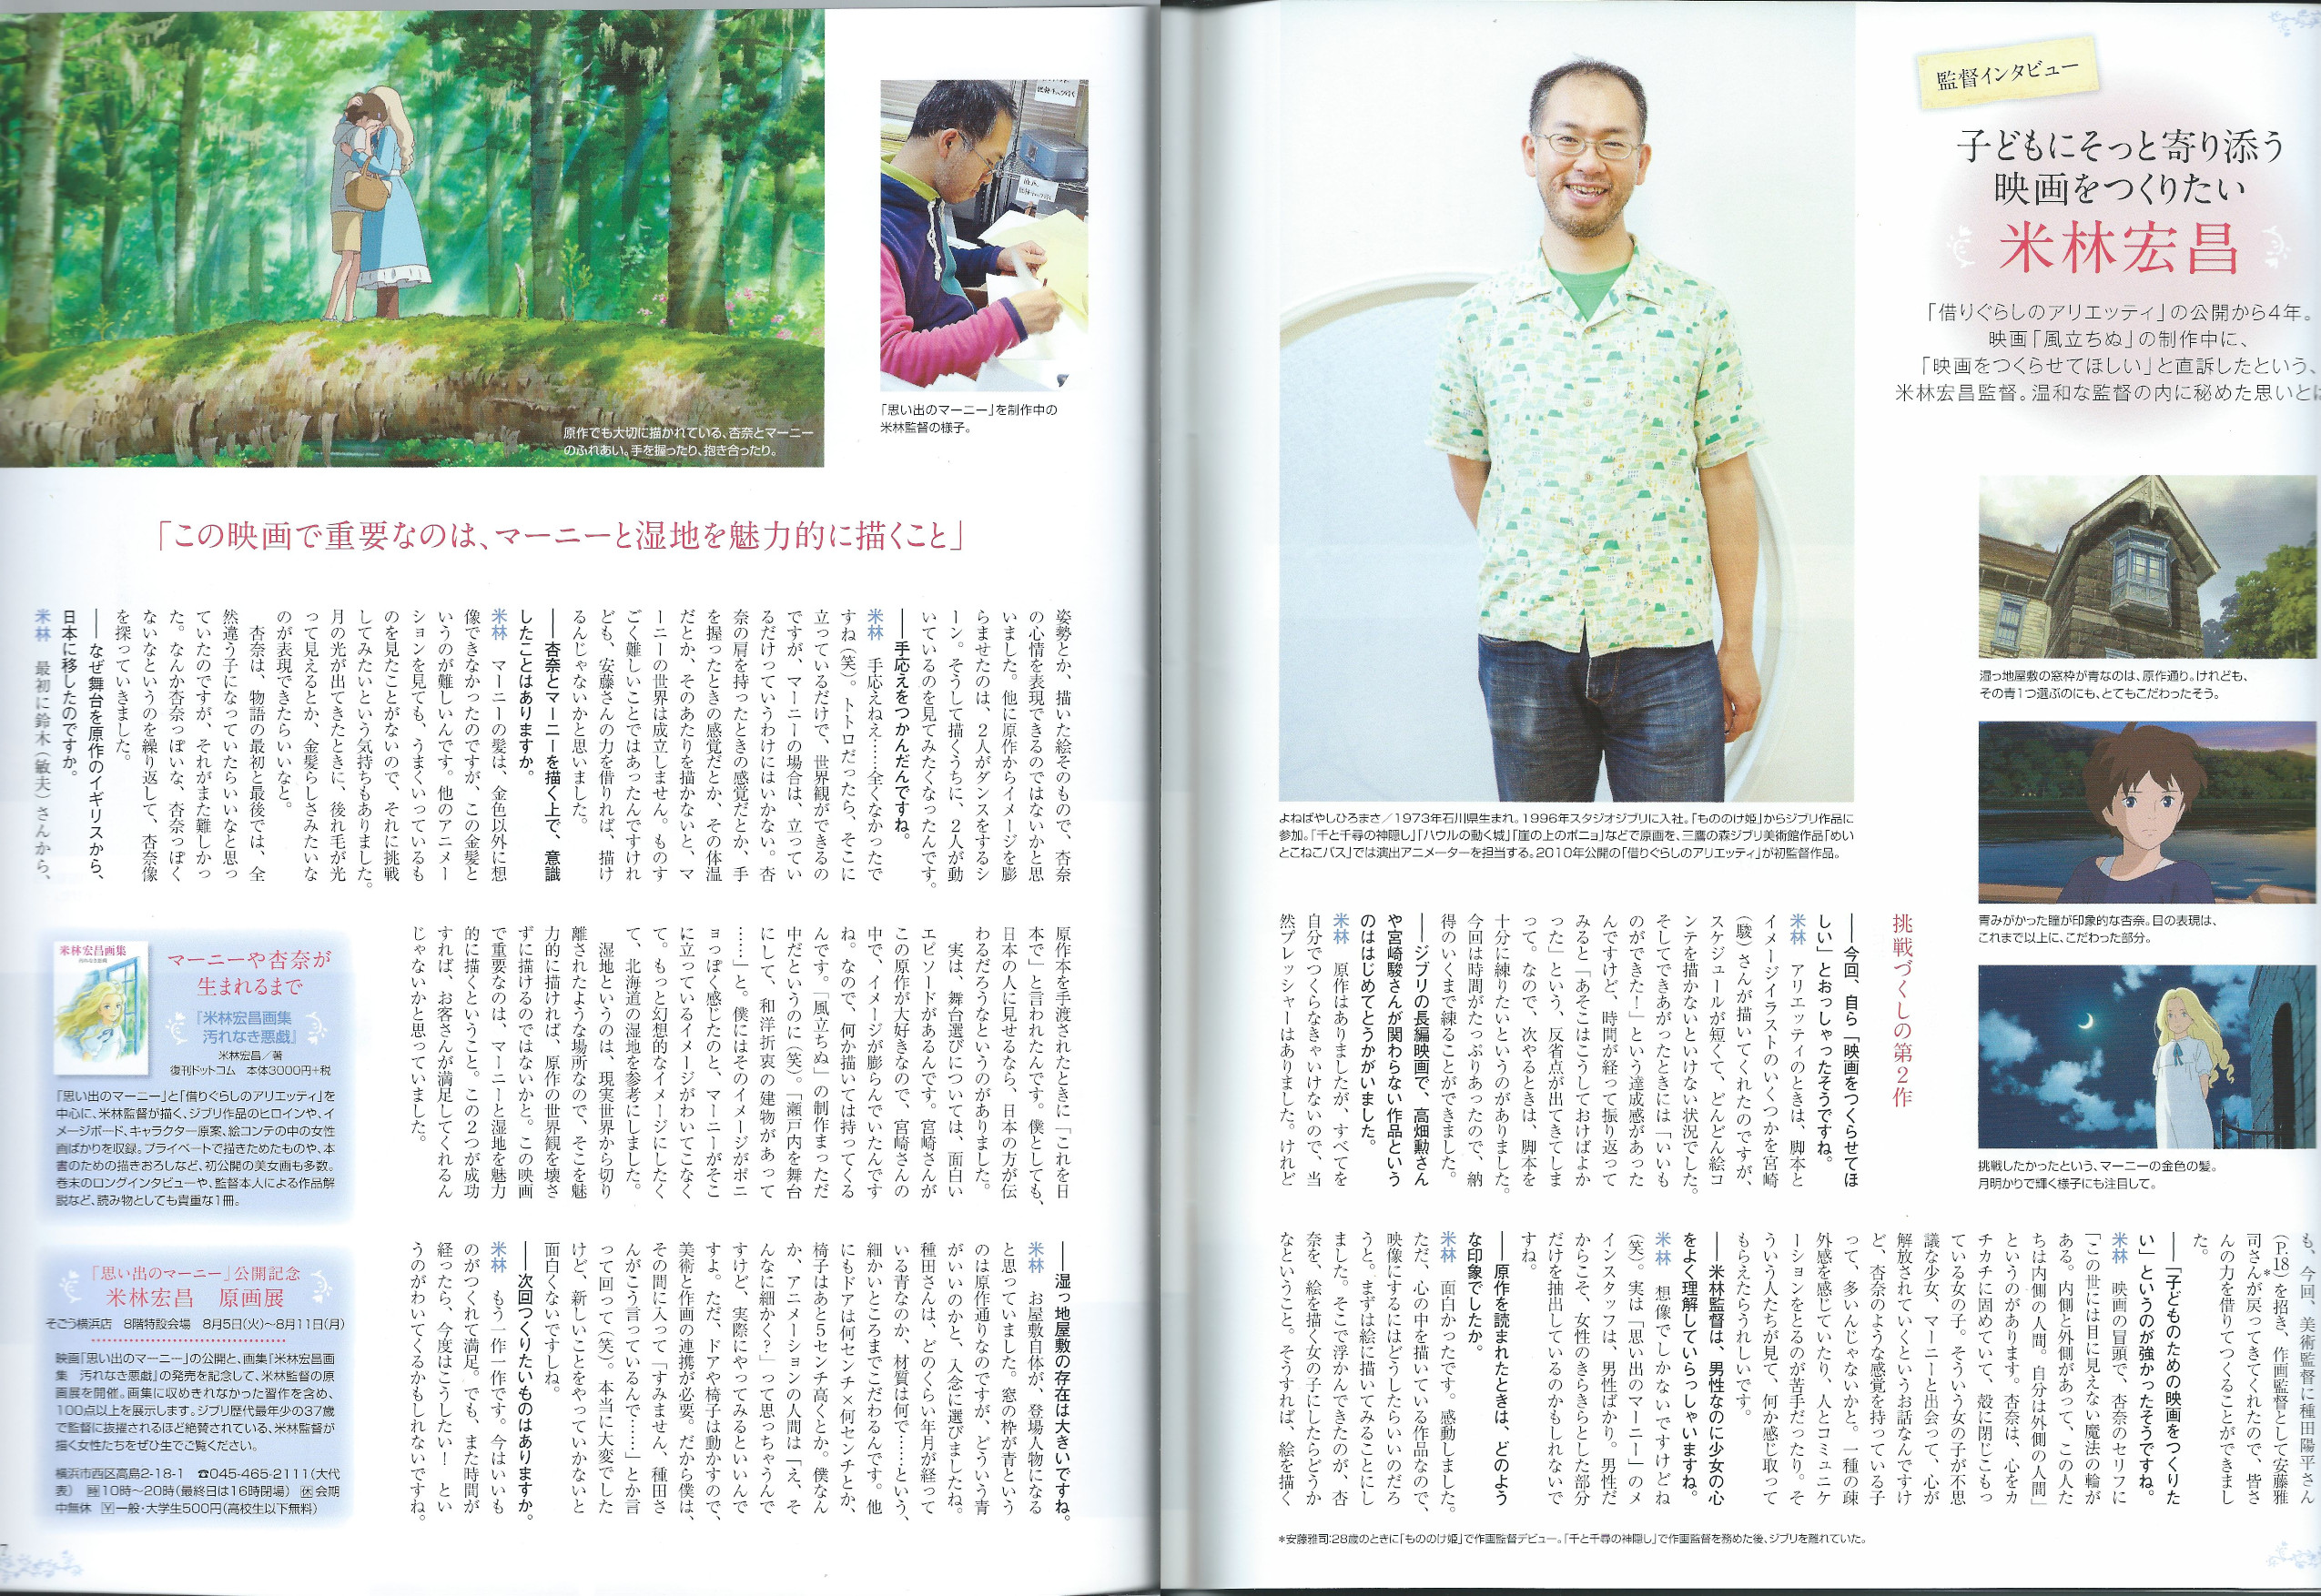 Pages 16 and 17 of the magazine